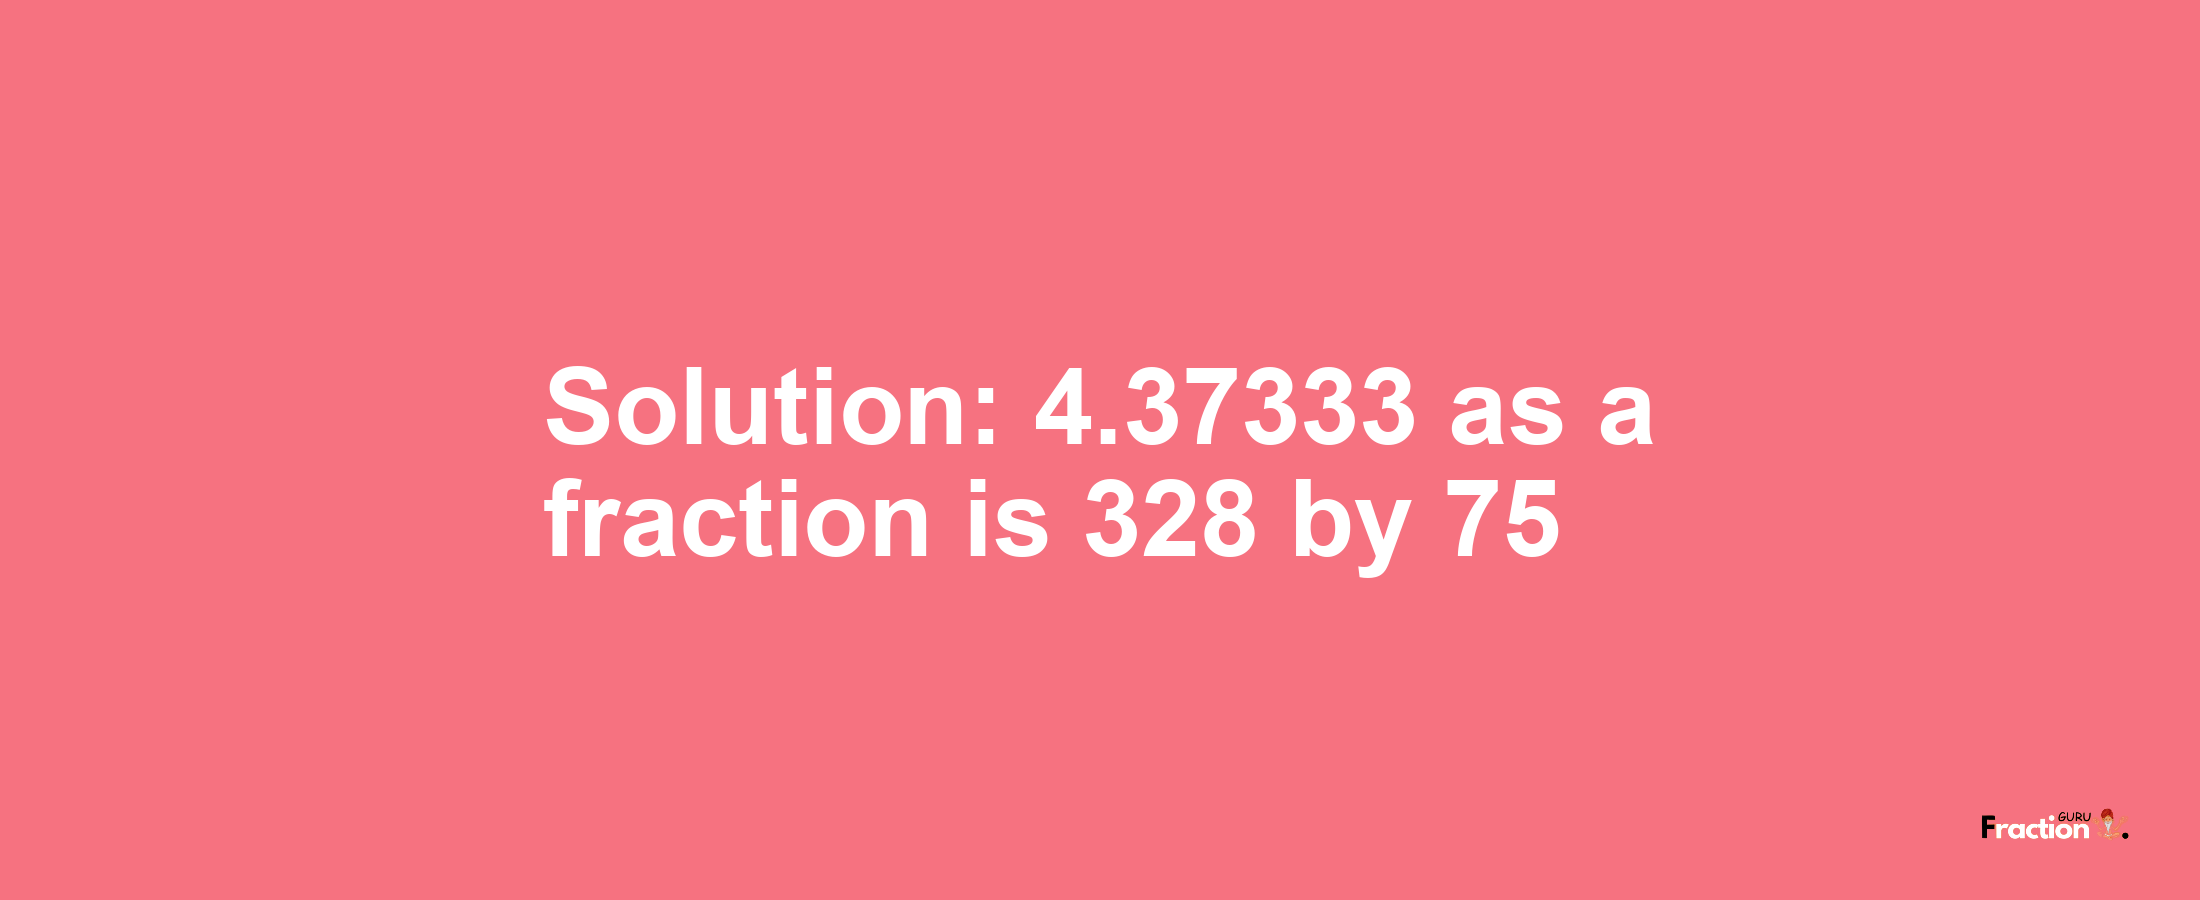 Solution:4.37333 as a fraction is 328/75